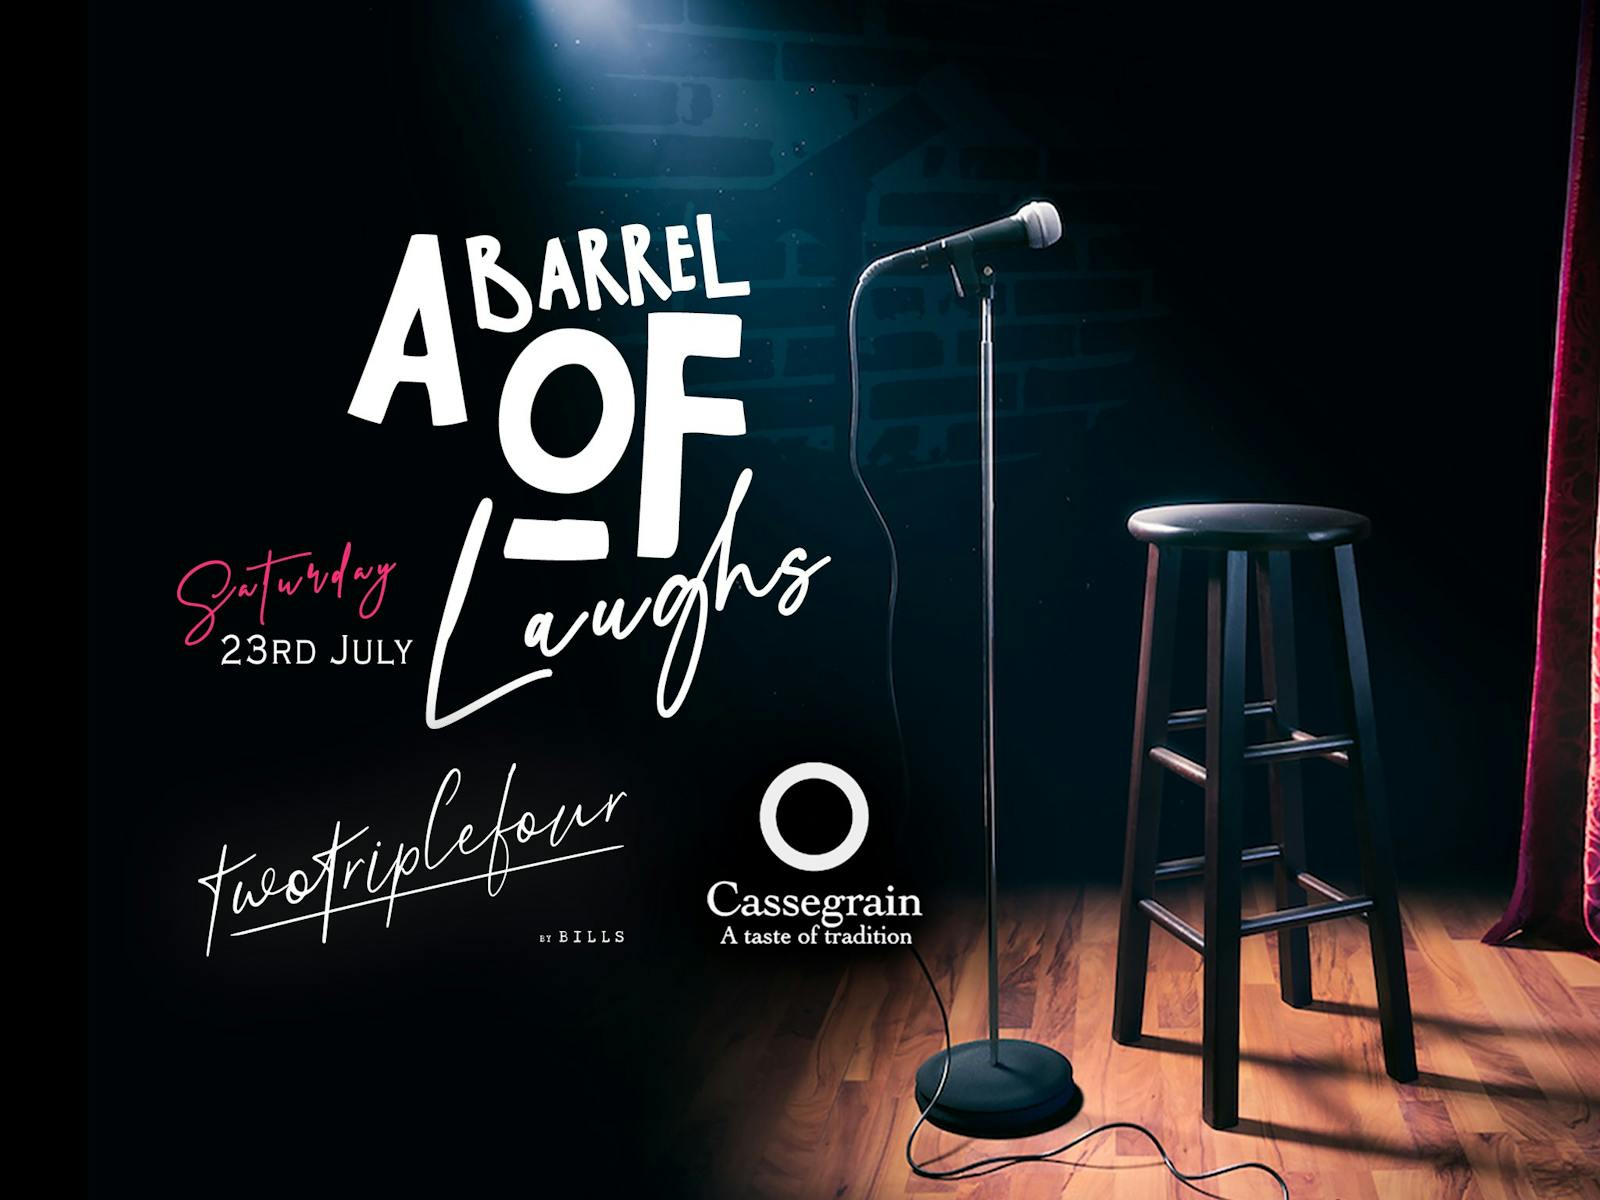 Image for 'A Barrel of Laughs' Comedy Dinner Show